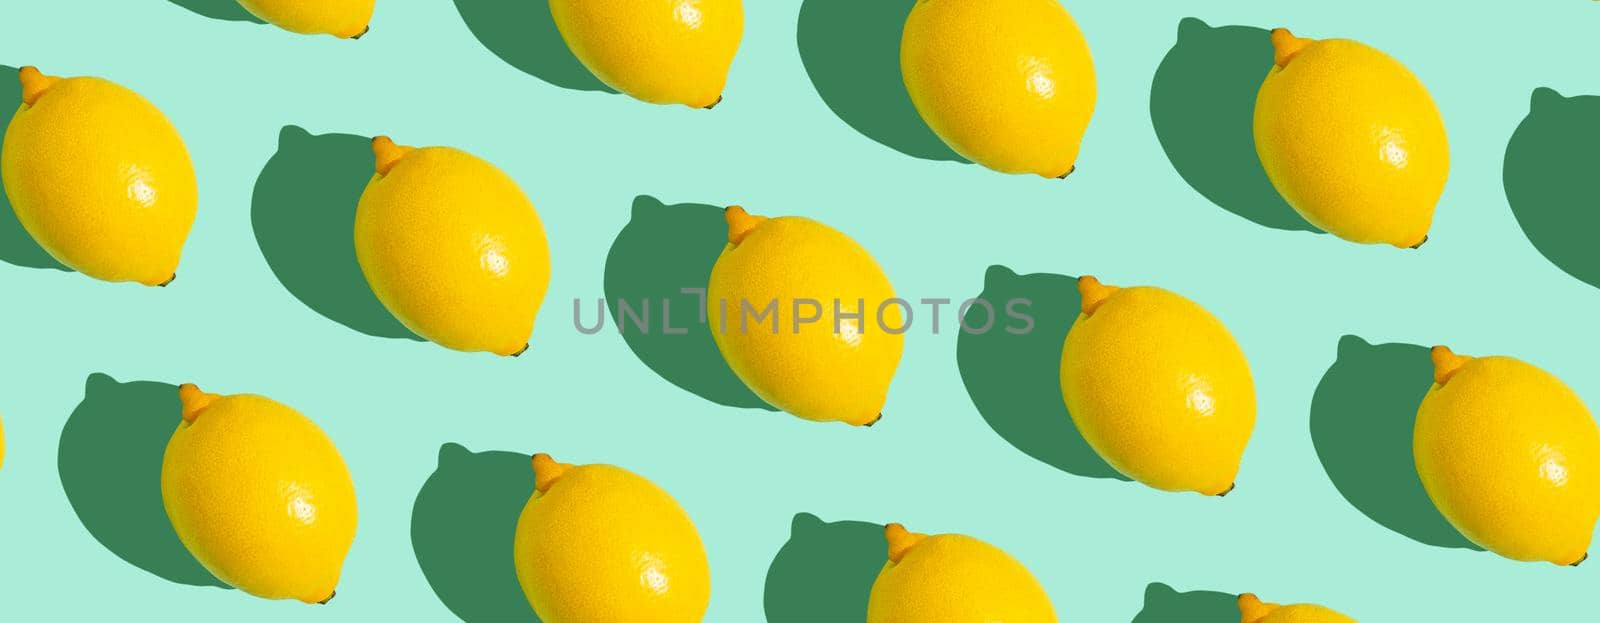 Yellow whole lemons on minimal blue background on bright sun light with hard shadows pattern by its_al_dente